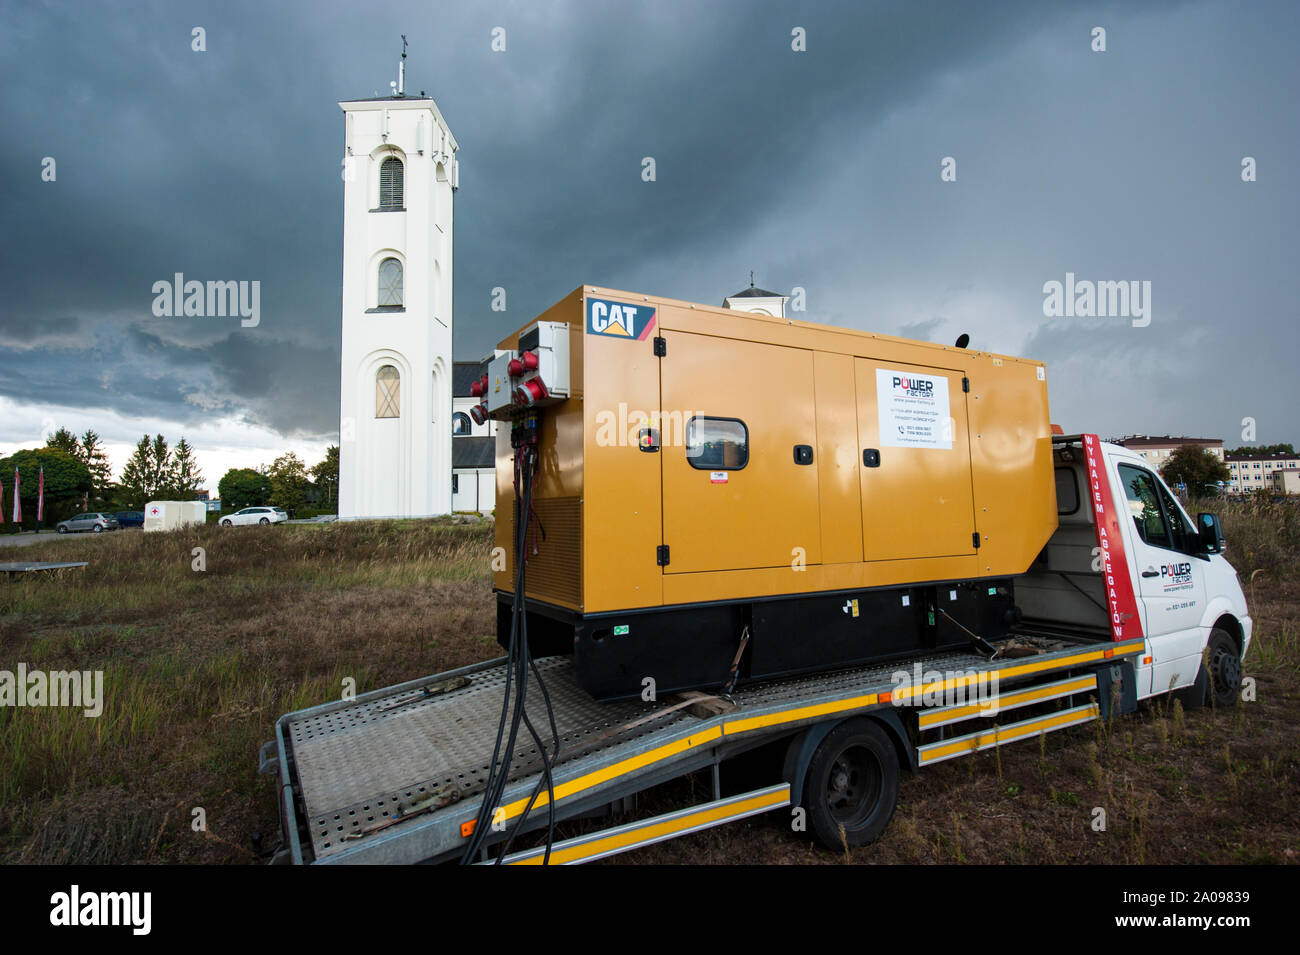 Emergency electric power generator used during stormy weather in Pultusk, Poland, to provide electricity for a community with church and a hospital. Stock Photo